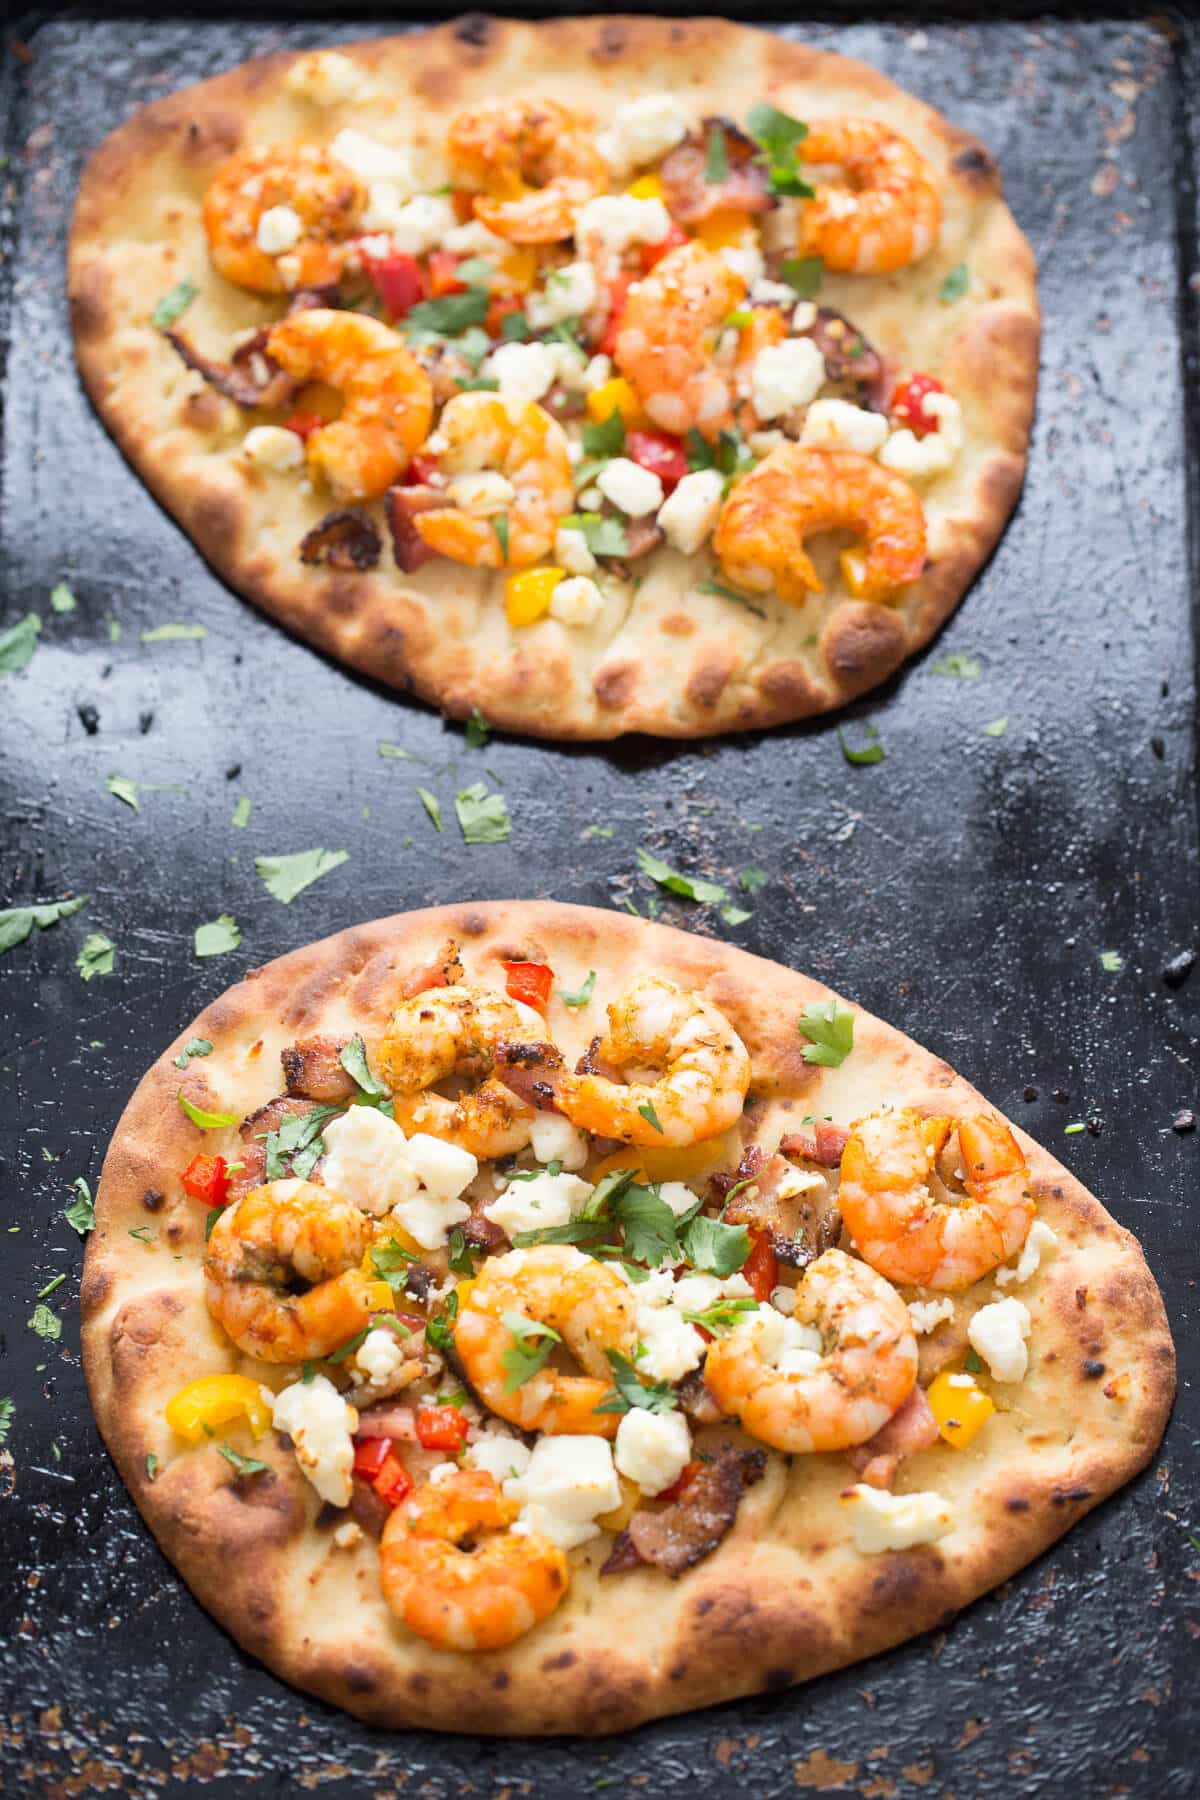 This Cajun Shrimp Pizza can be served as an appetizer or as a meal, either way your family is going to love it!